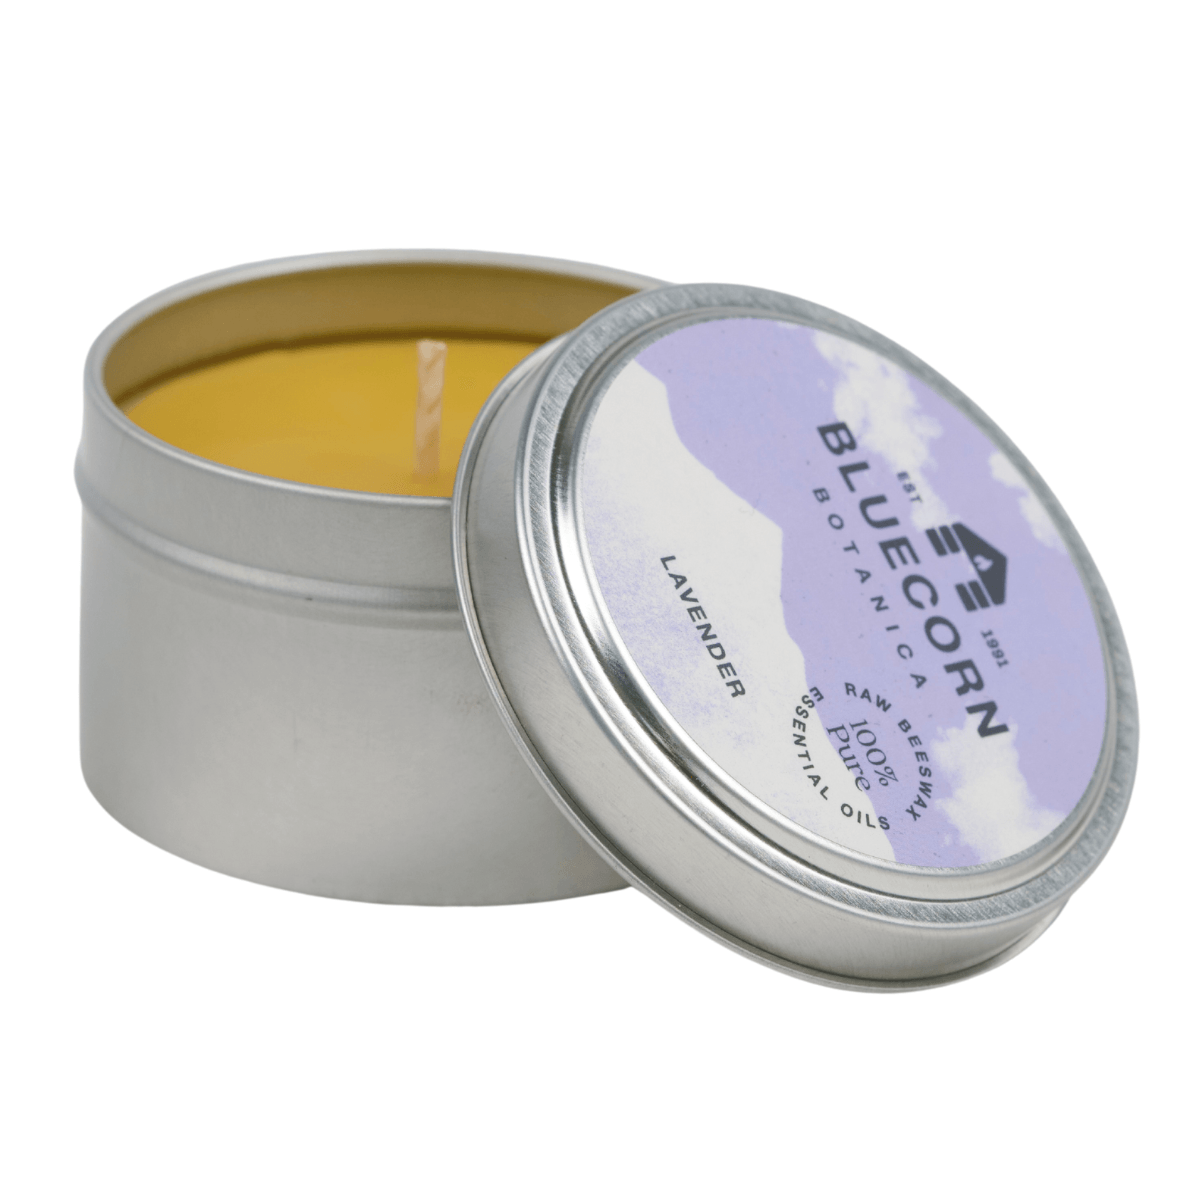 Bluecorn Botanica Lavender 100% Pure Beeswax Travel Tin Candle. Burn Time: 6oz Candle: 30 Hours. 2oz Candle 12 Hours. Made with 100% Pure Beeswax and 100% Pure Essential Oils. Made with 100% pure cotton wick, no lead and paraffin free. Clean burning and non-toxic. Features Bluecorn Botanica Label in recyclable aluminum tin. Perfect for travel, camping and gifts. 